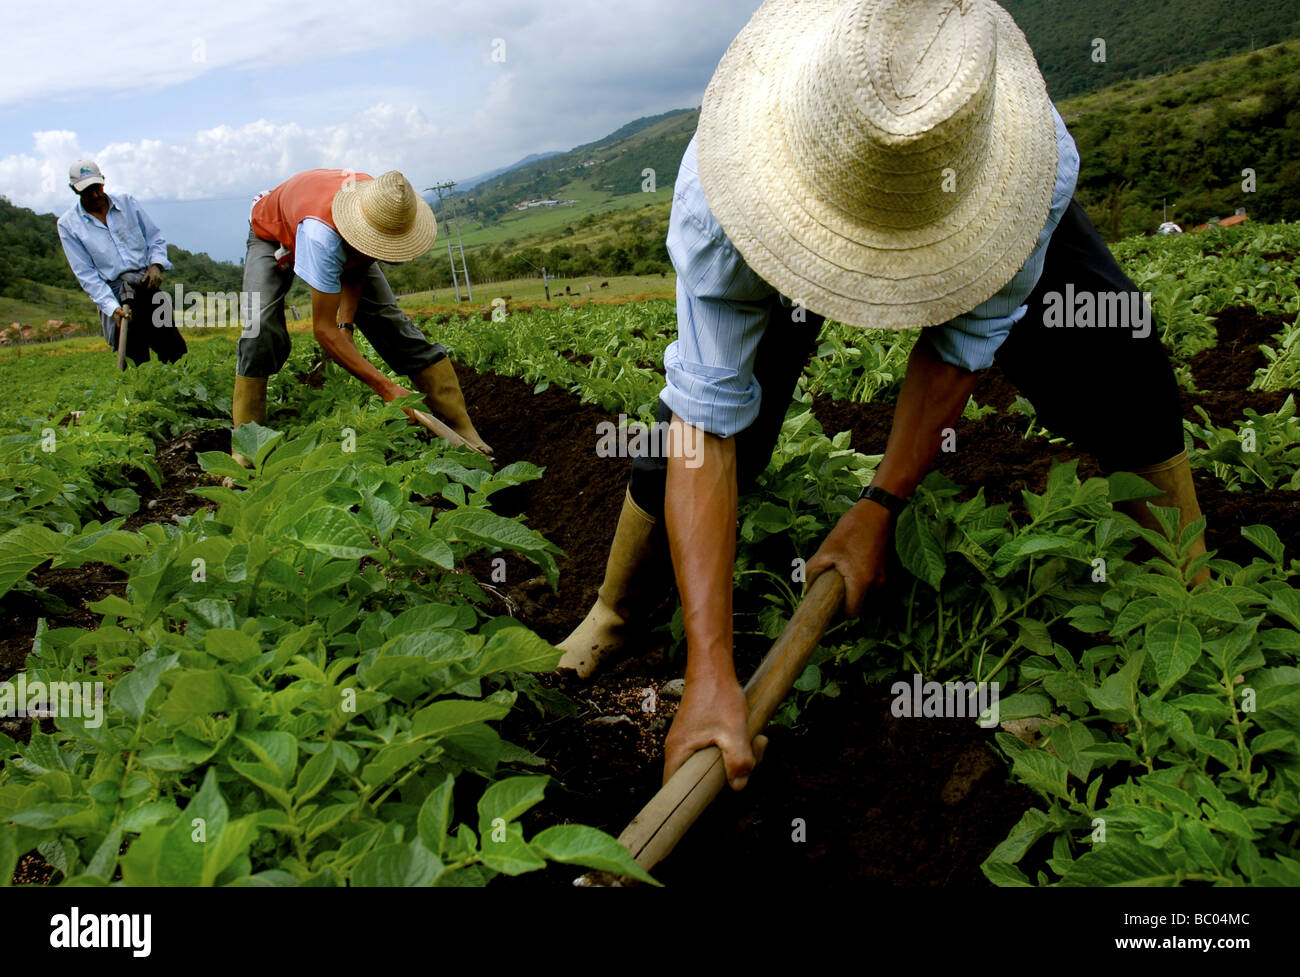 Latino agricultural workers in straw hats tend to their potato field in Merida, Venezuela. Stock Photo